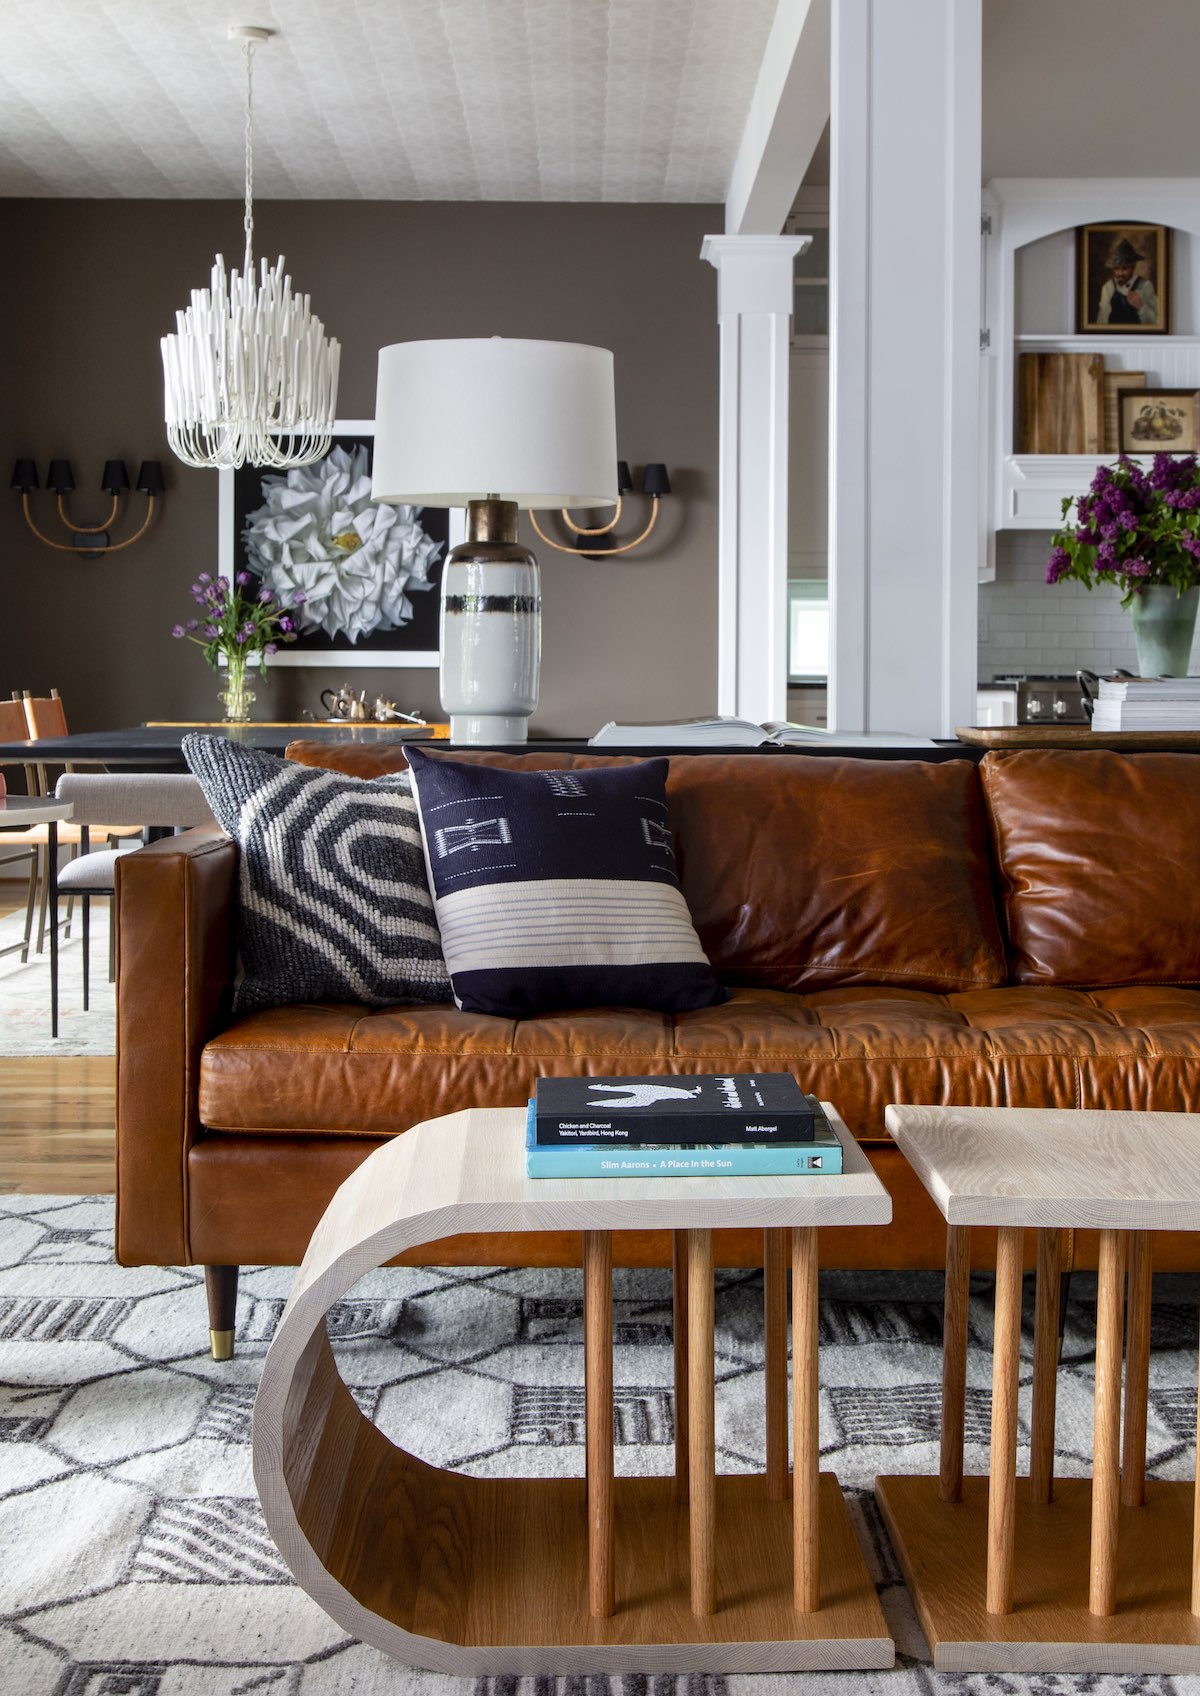 A leather track arm sofa will never go out of style and will only get better with age. “In summer with the air conditioning blowing, a leather sofa can feel a little cold so I always include a mix of pillows in fabrics like velvet,” says Tollett.